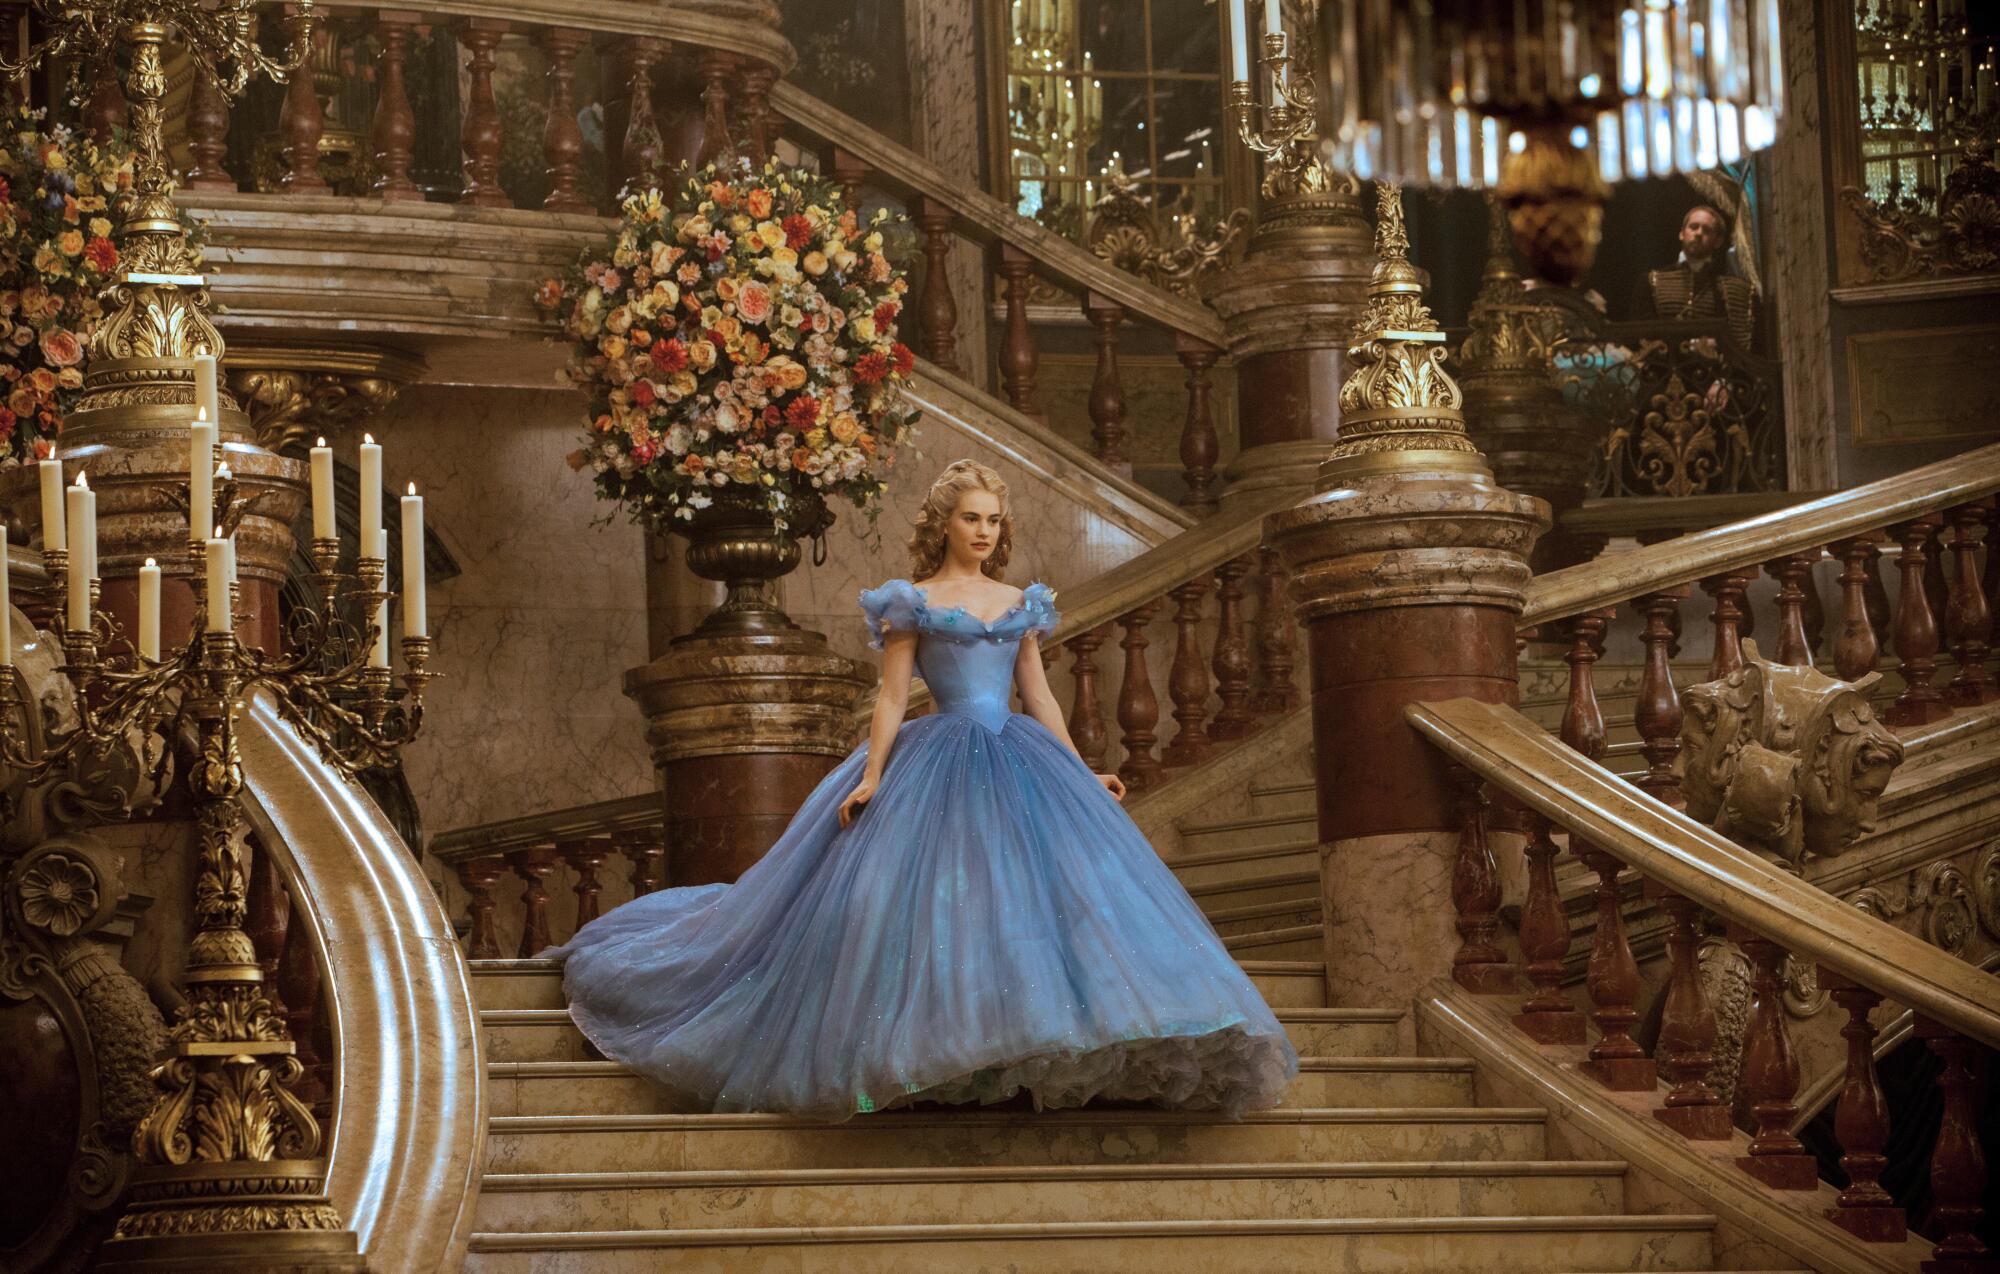 James seen as Cinderella in Disney's live-action feature inspired by the classic fairy tale of the 1950 animated masterpiece.